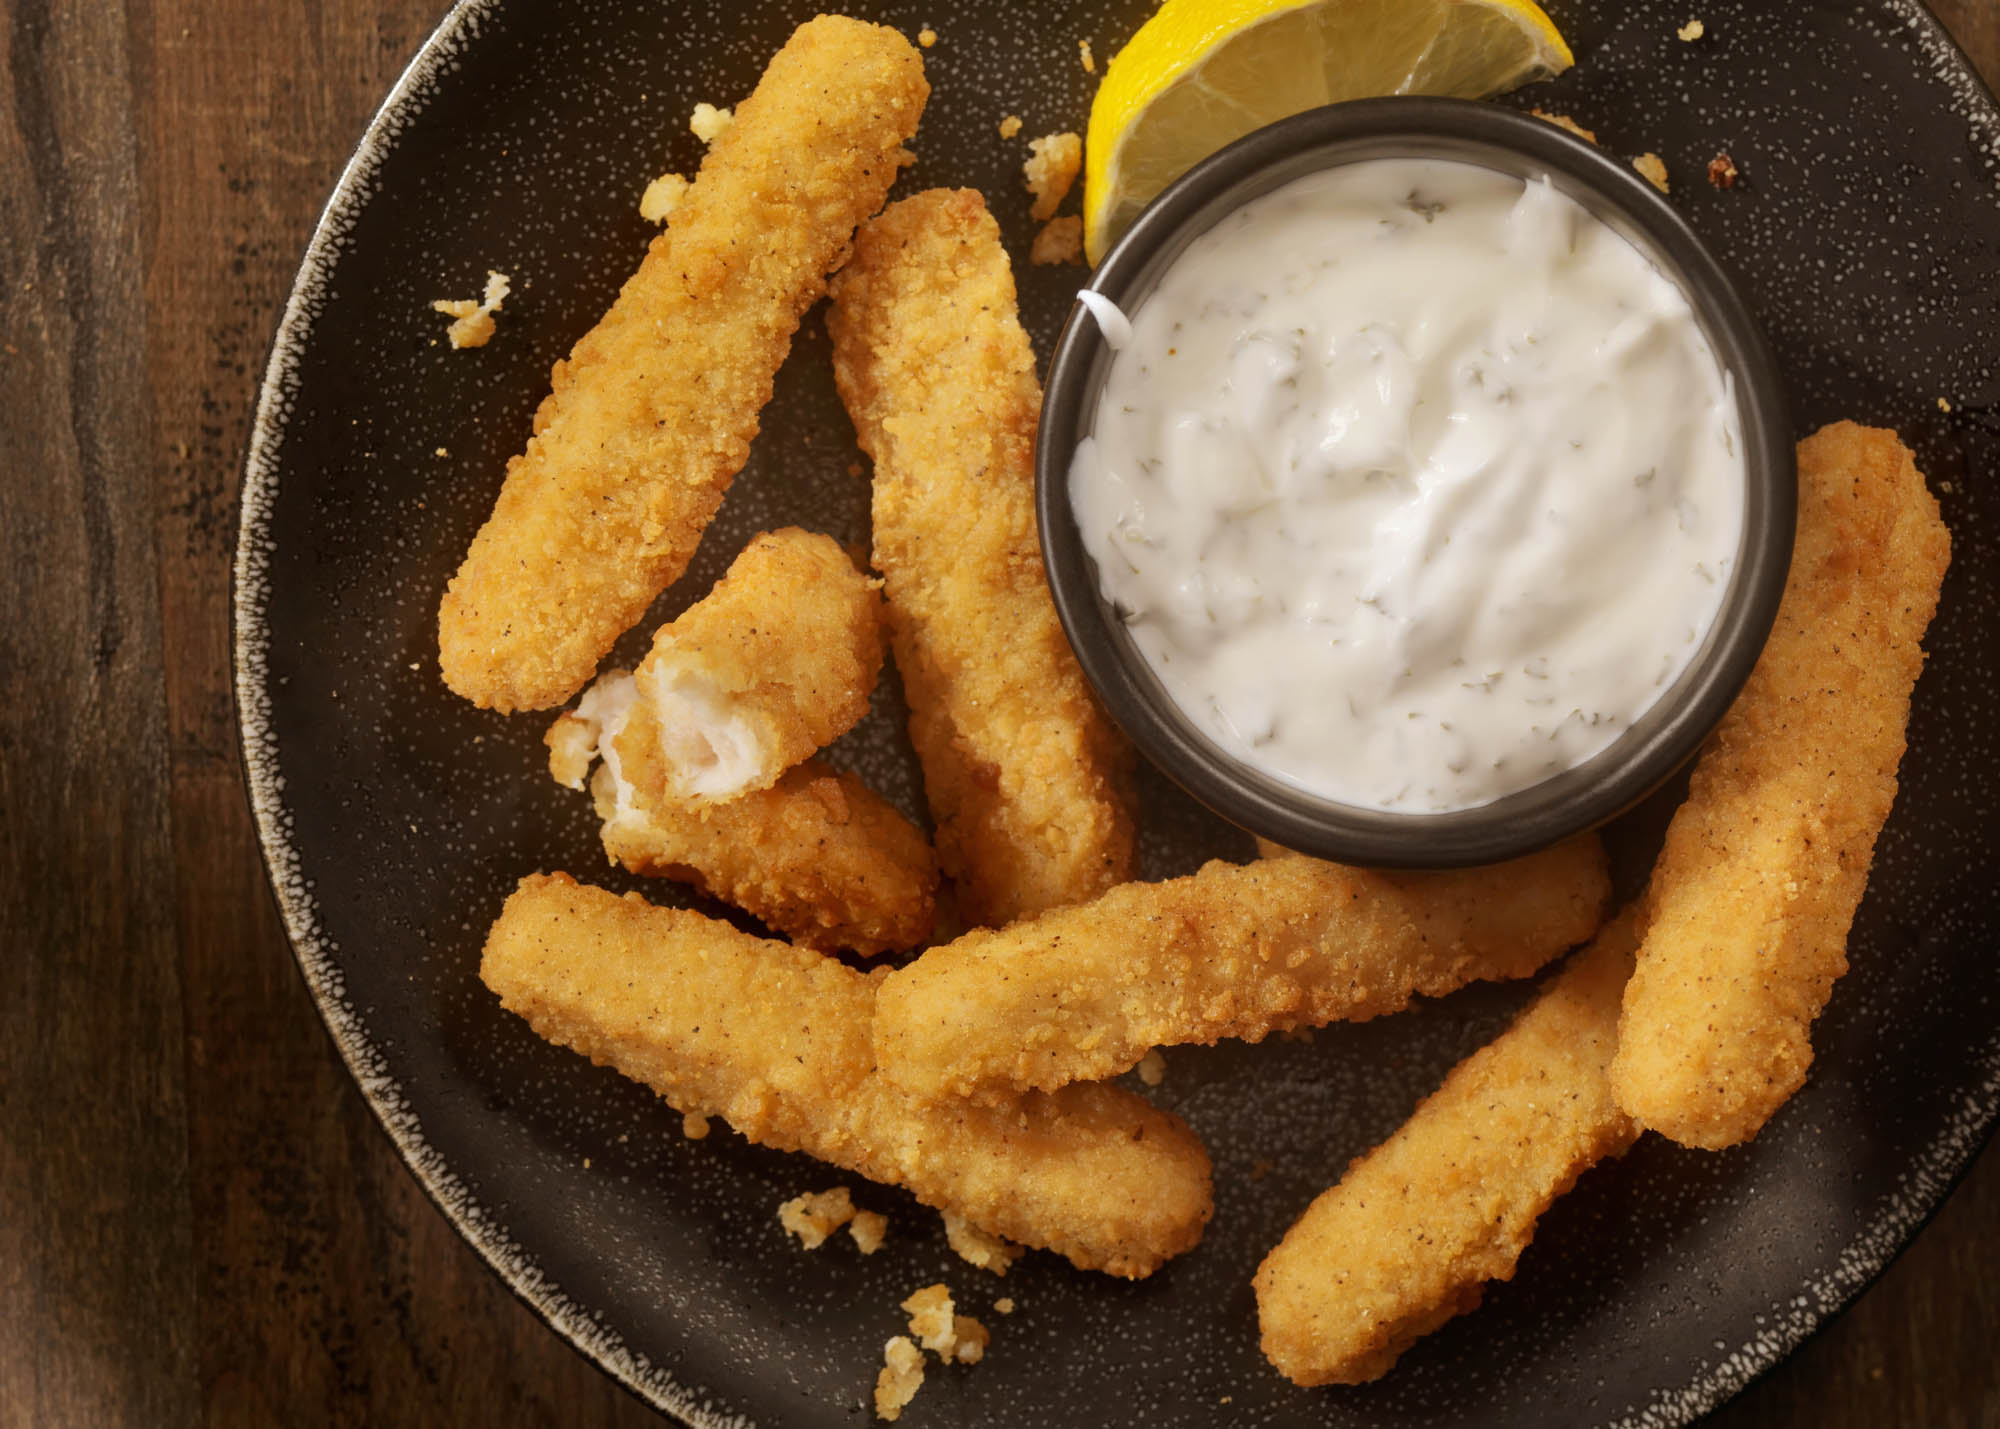 All White Meat Chicken Fries with Ranch Dip - Photographed on Hasselblad H3D2-39mb Camera